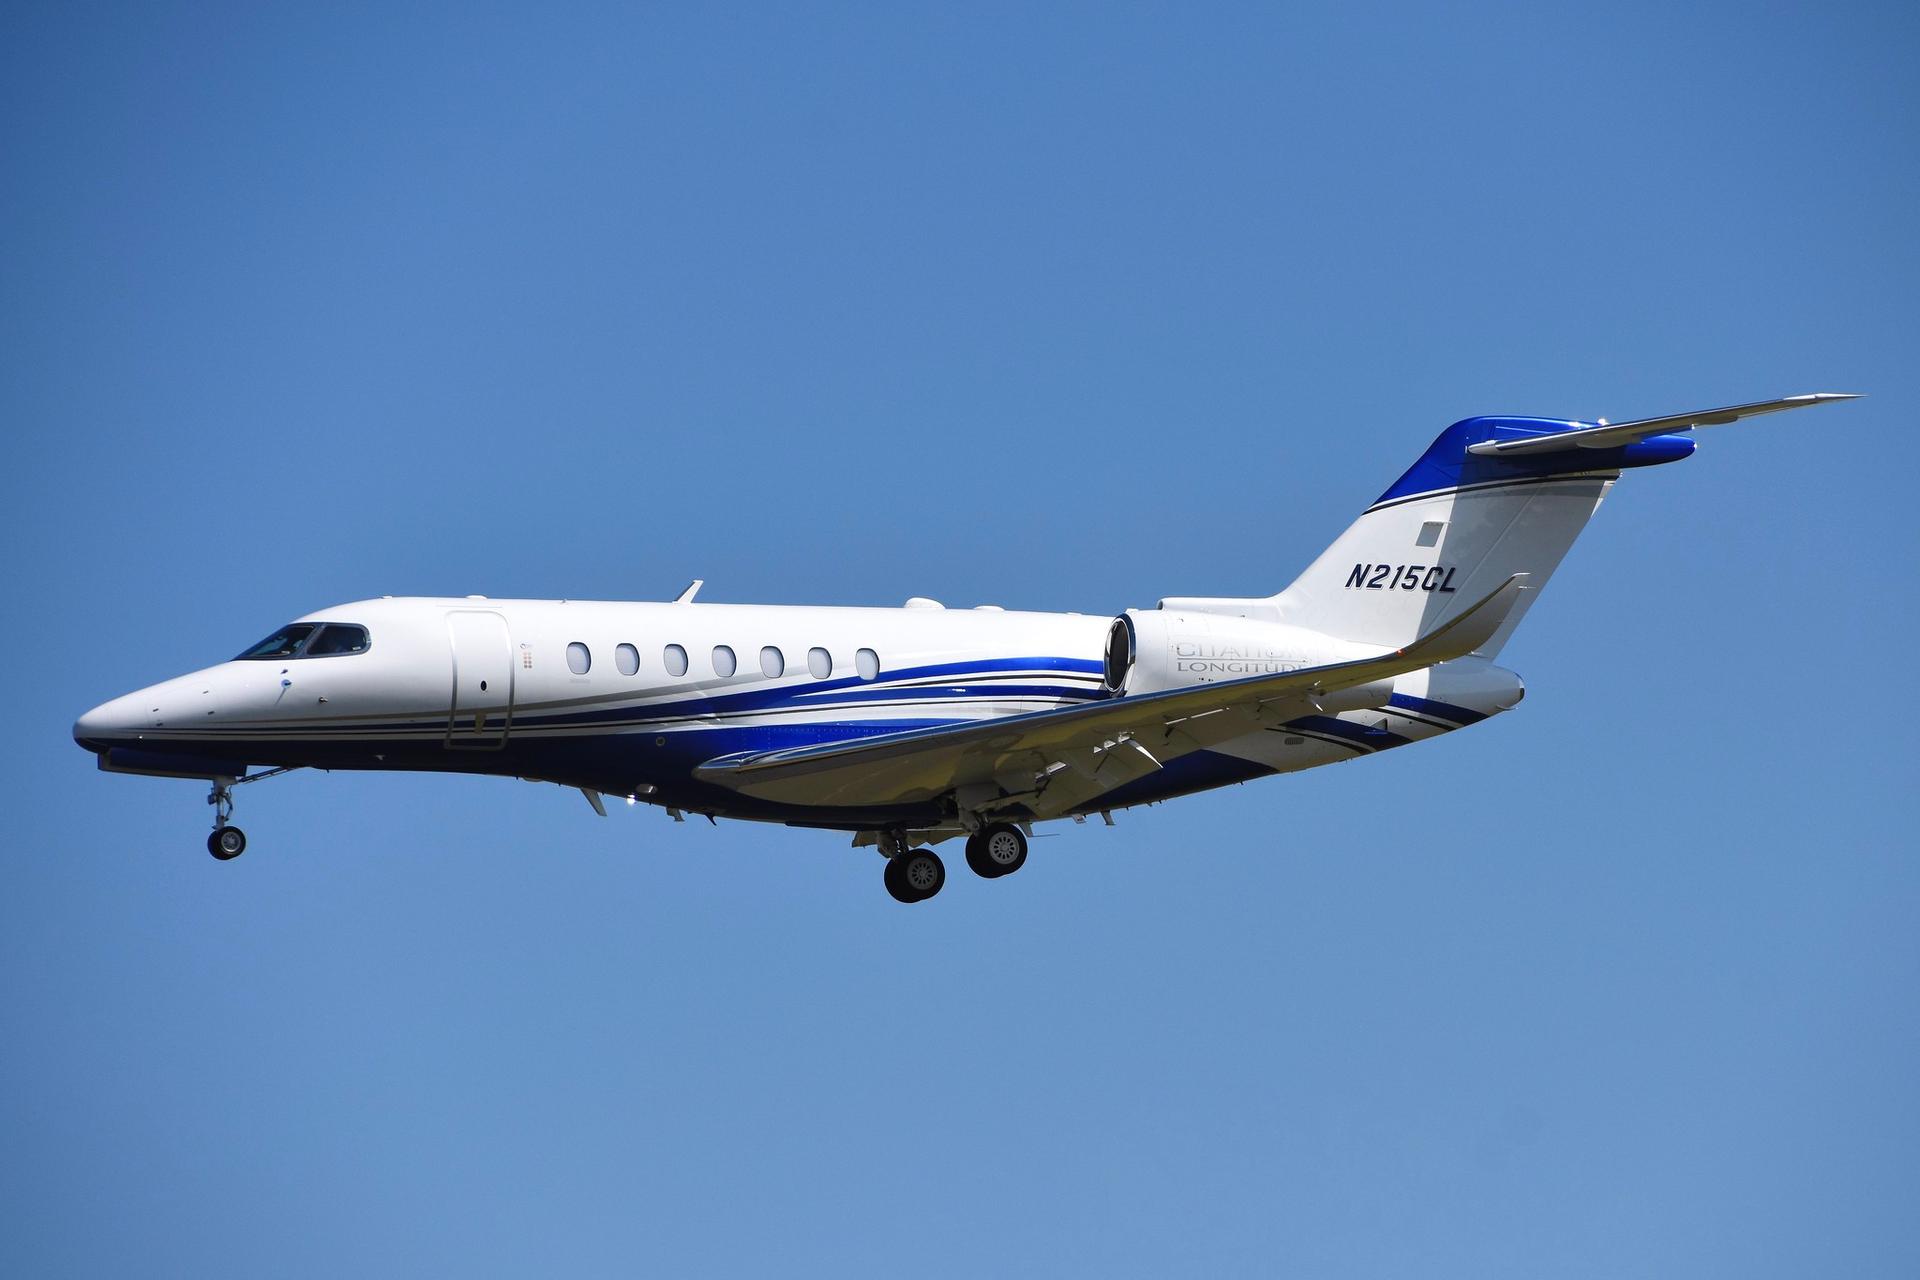 A white Cessna Citation Longitude with blue accents and a deployed landing gear in front of a blue sky.